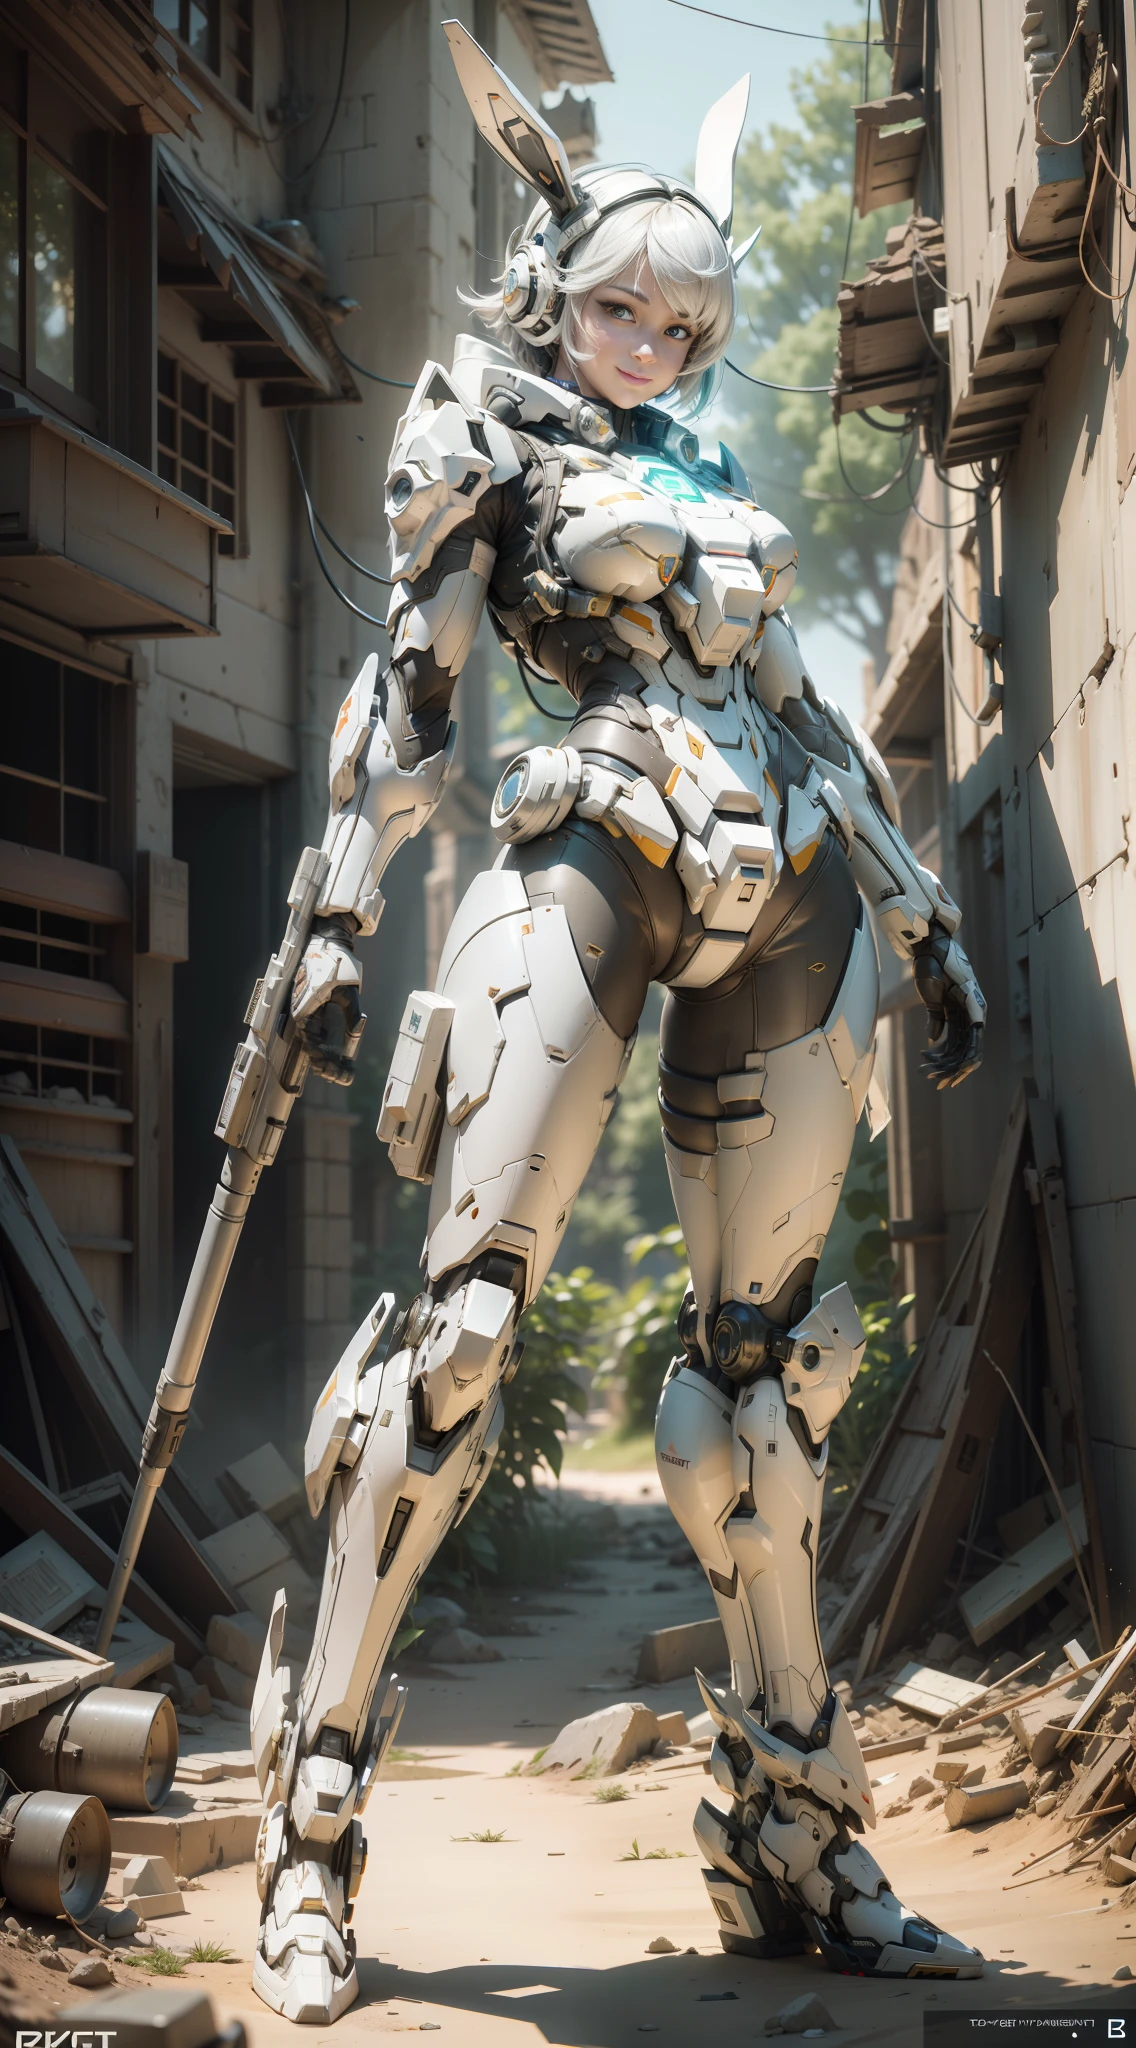 ((Best Quality)), ((Masterpiece)), (Very detailed:1.3), 3D, Shitu-mecha, Full body, 1 beautiful woman, smiling, short hair, wearing a mech in white color scheme, long rabbit ears on the head, (the mech has the characteristics of a rabbit), the feet are flat, in the ruins of the forgotten war city, ancient technology, HDR (high dynamic range), ray tracing, nvidia RTX, super resolution, Unreal 5, subsurface scattering, PBR texture, post-processing, Anisotropic Filtering, Depth of Field, Maximum Sharpness and Acutance, Multi-layer Textures, Albedo and Highlight Maps, Surface Shading, Accurate Simulation of Light-Material Interactions, Perfect Proportions, Octane Rendering, Duotone Illumination, Low ISO, White Balance, Rule of Thirds, Wide Aperture, 8K RAW, High Efficiency Subpixels, Subpixel Convolution, Luminescent Particles, Light Scattering, Tyndall Effect